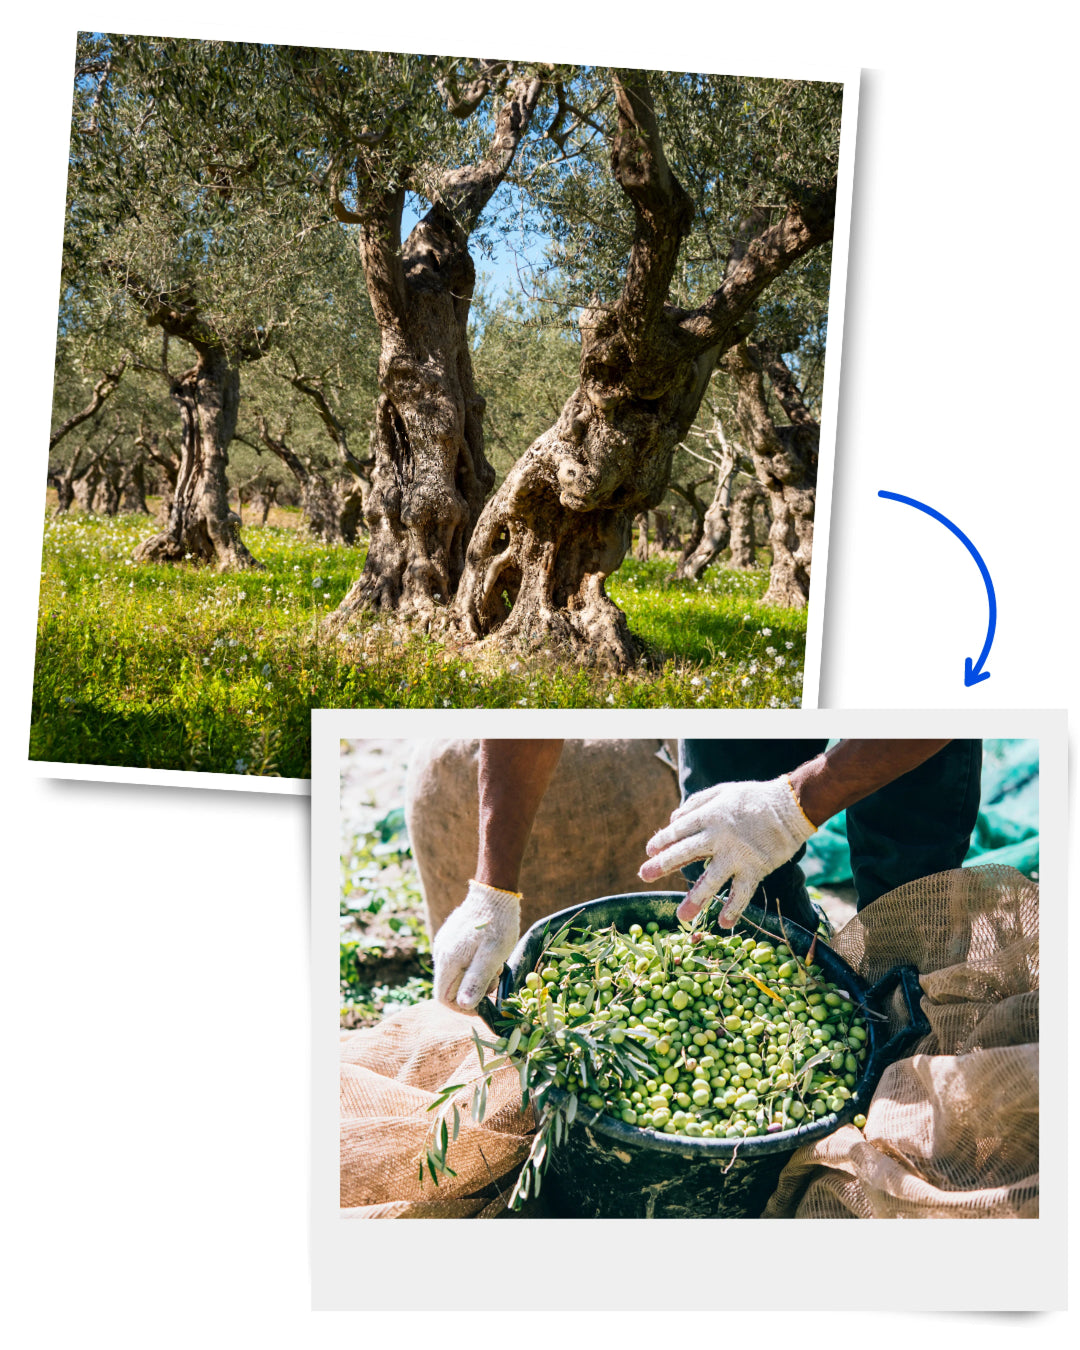 Image shows centenarian wild olive trees being harvested by hand to produce zoefull's wild olive oil.